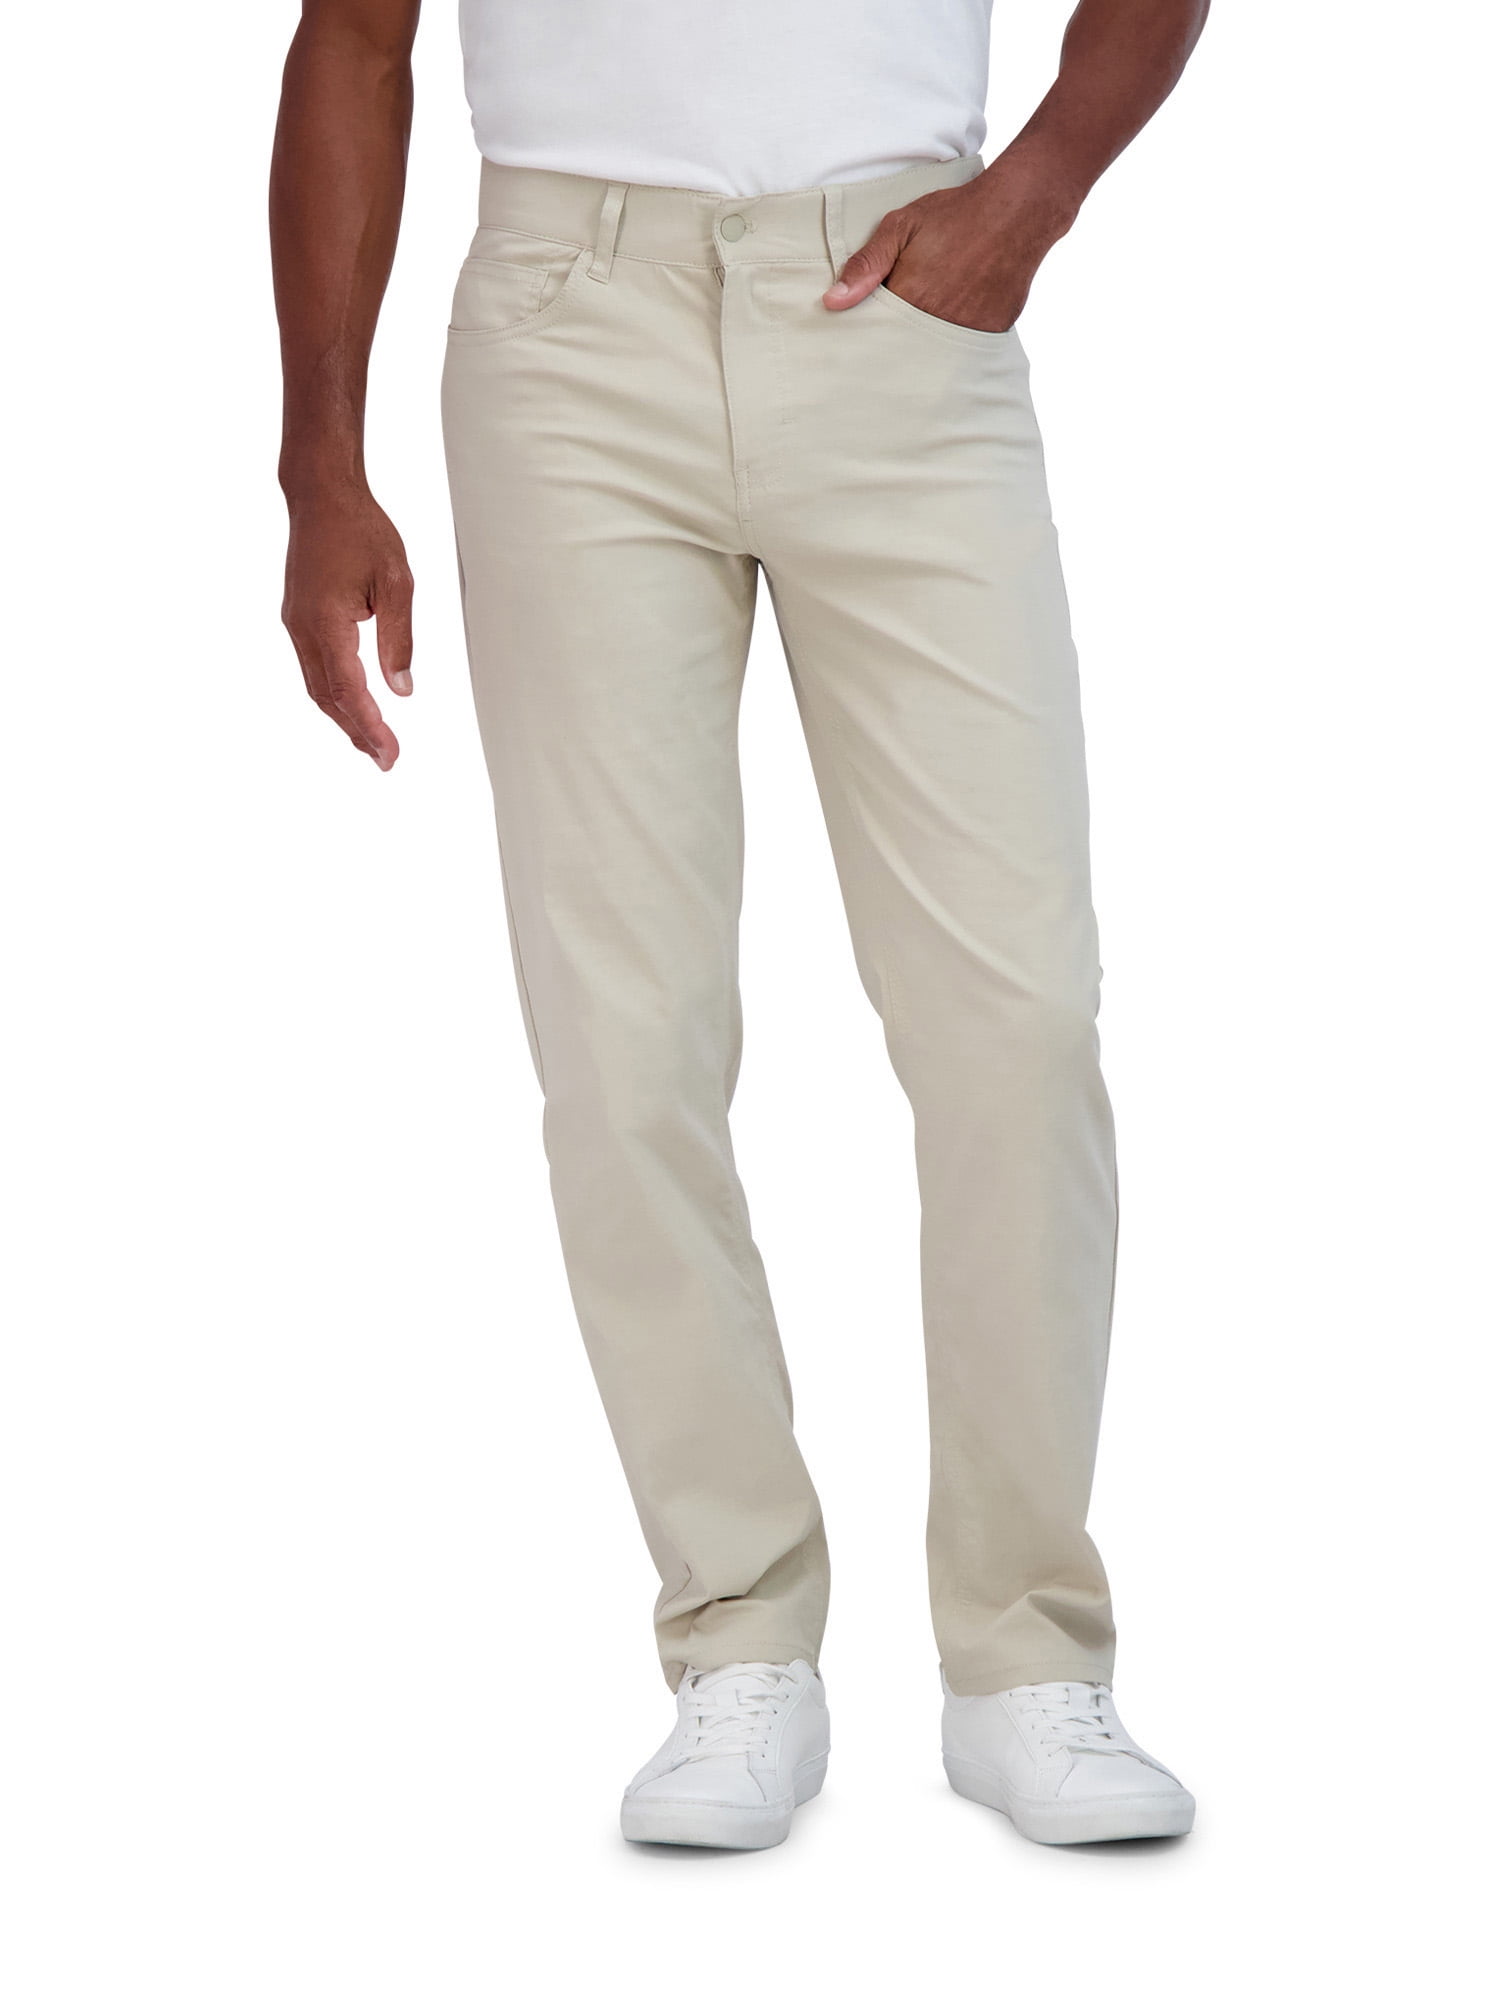 Chaps Boys' Dress Pants On Sale Up To 90% Off Retail | thredUP